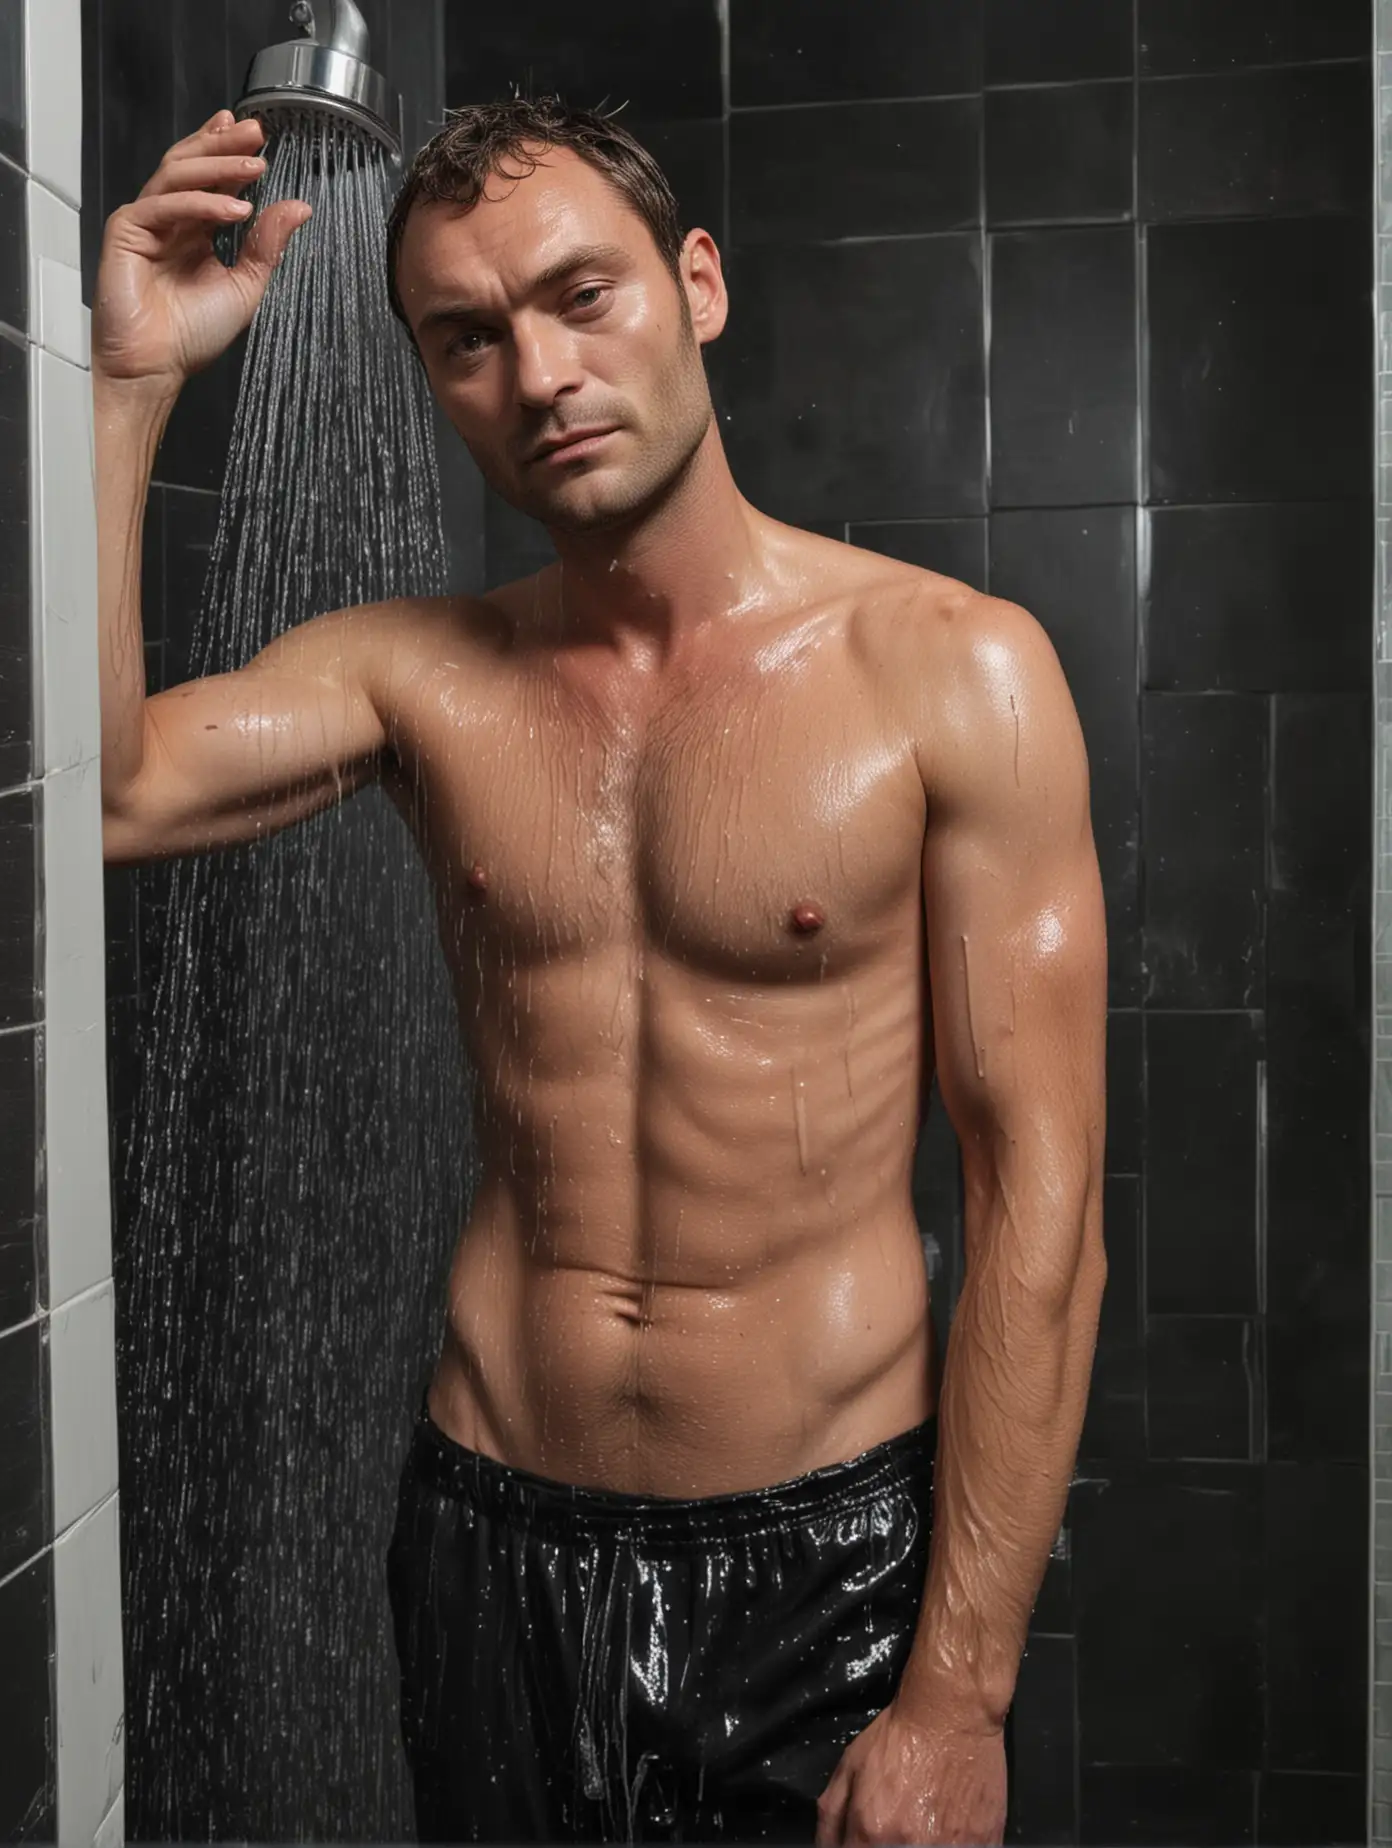 A man who looks a lot like Jude Law taking a shower in his black-tiled bathroom